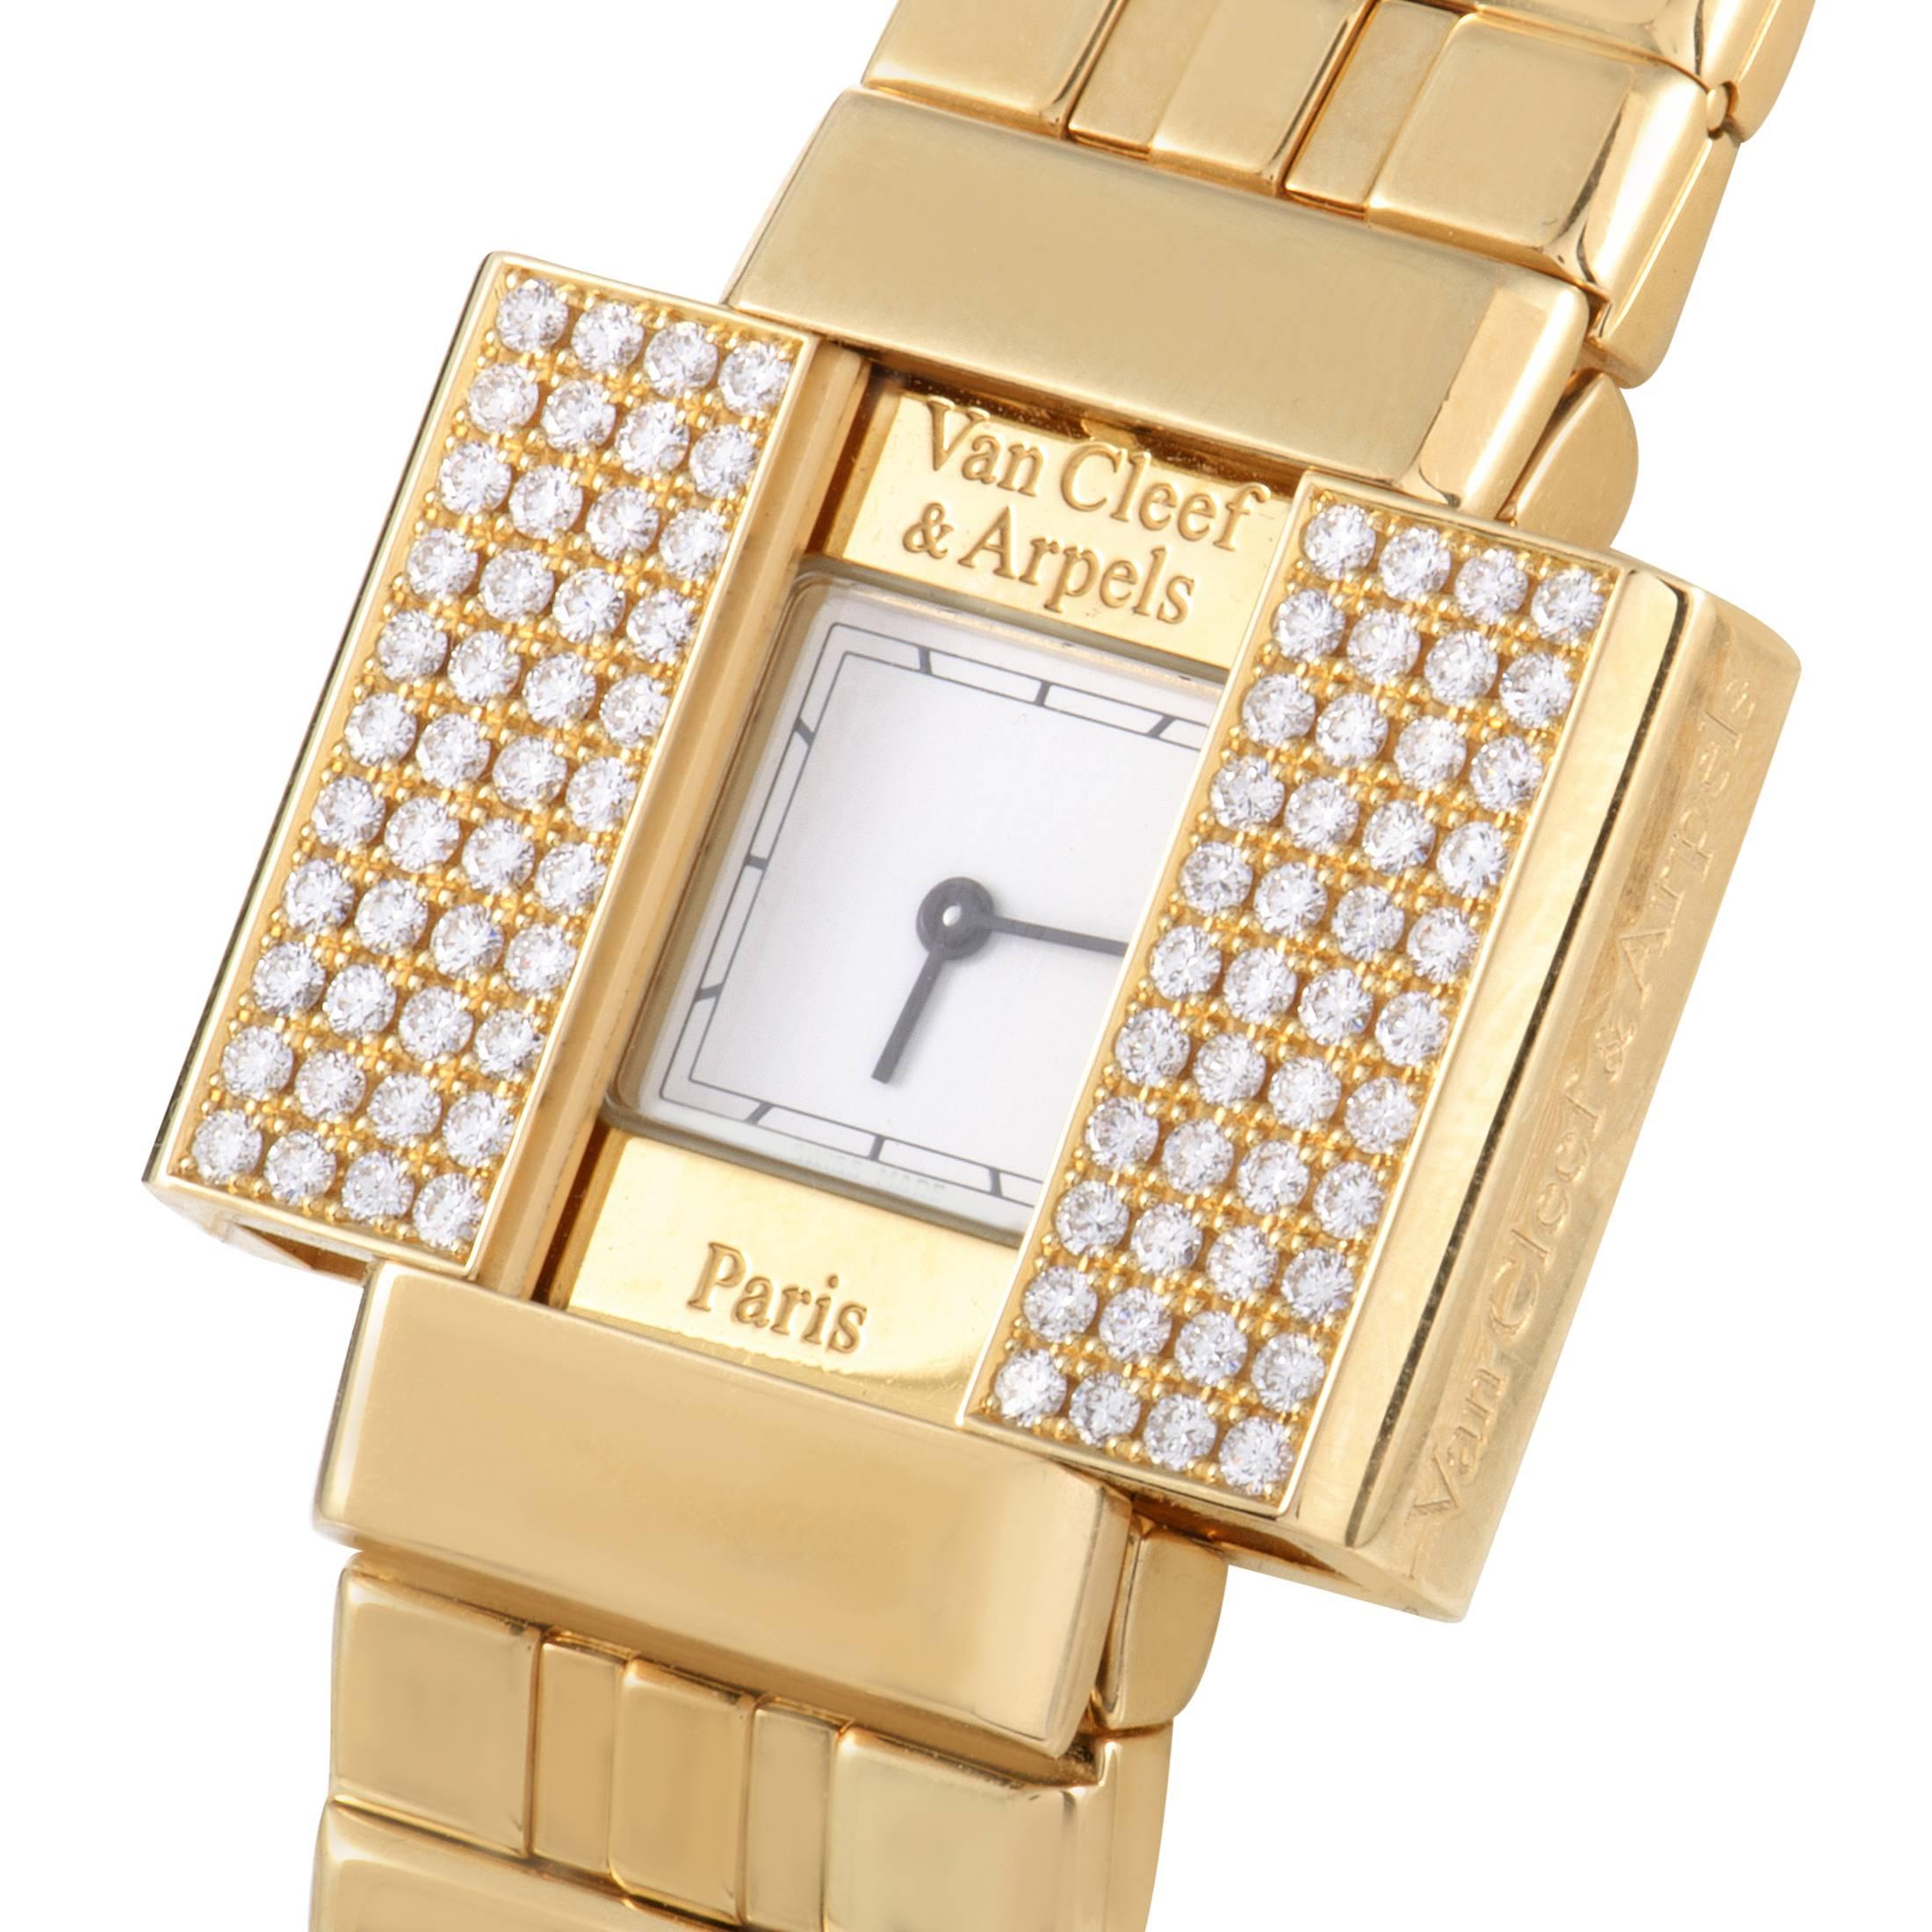 Producing an aura of classic luxury and fabulous style, this spellbinding and exuberant item from Van Cleef & Arpels is a compelling blend of wristwatch practicality and bracelet radiance, concealing the dial underneath a marvelous diamond